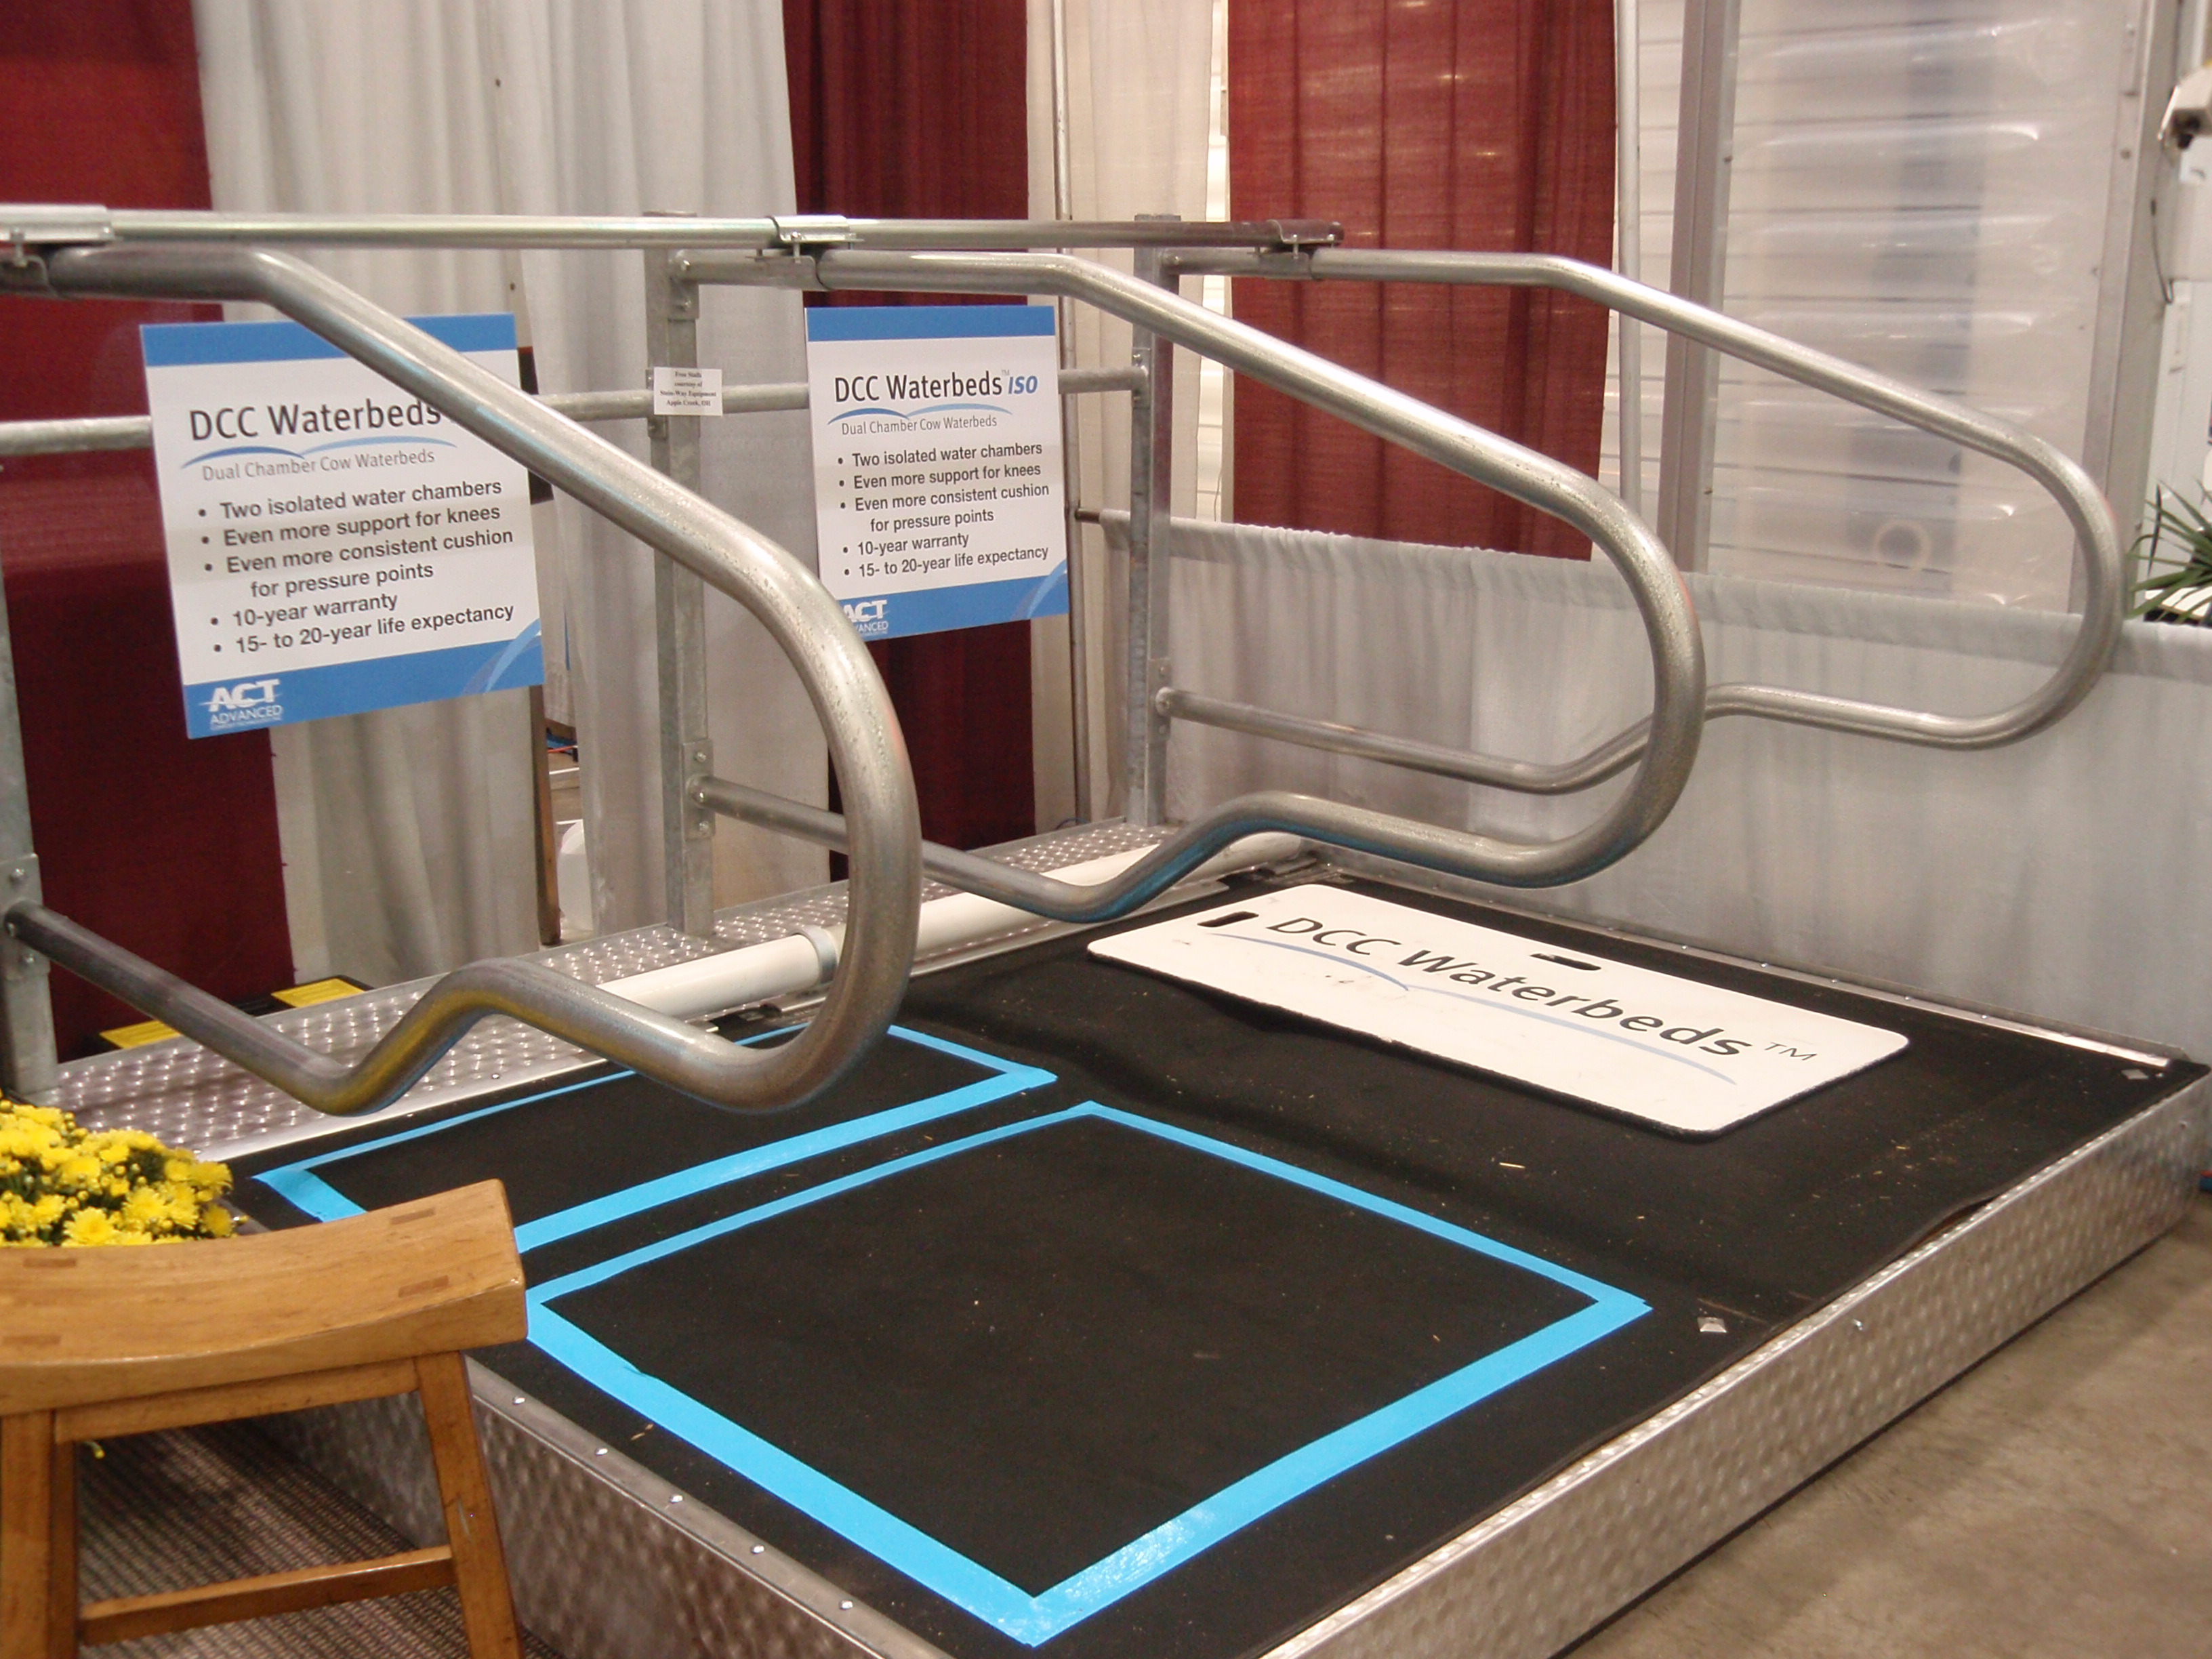 Browsing through the trade show, you can find everything including waterbeds for cows!